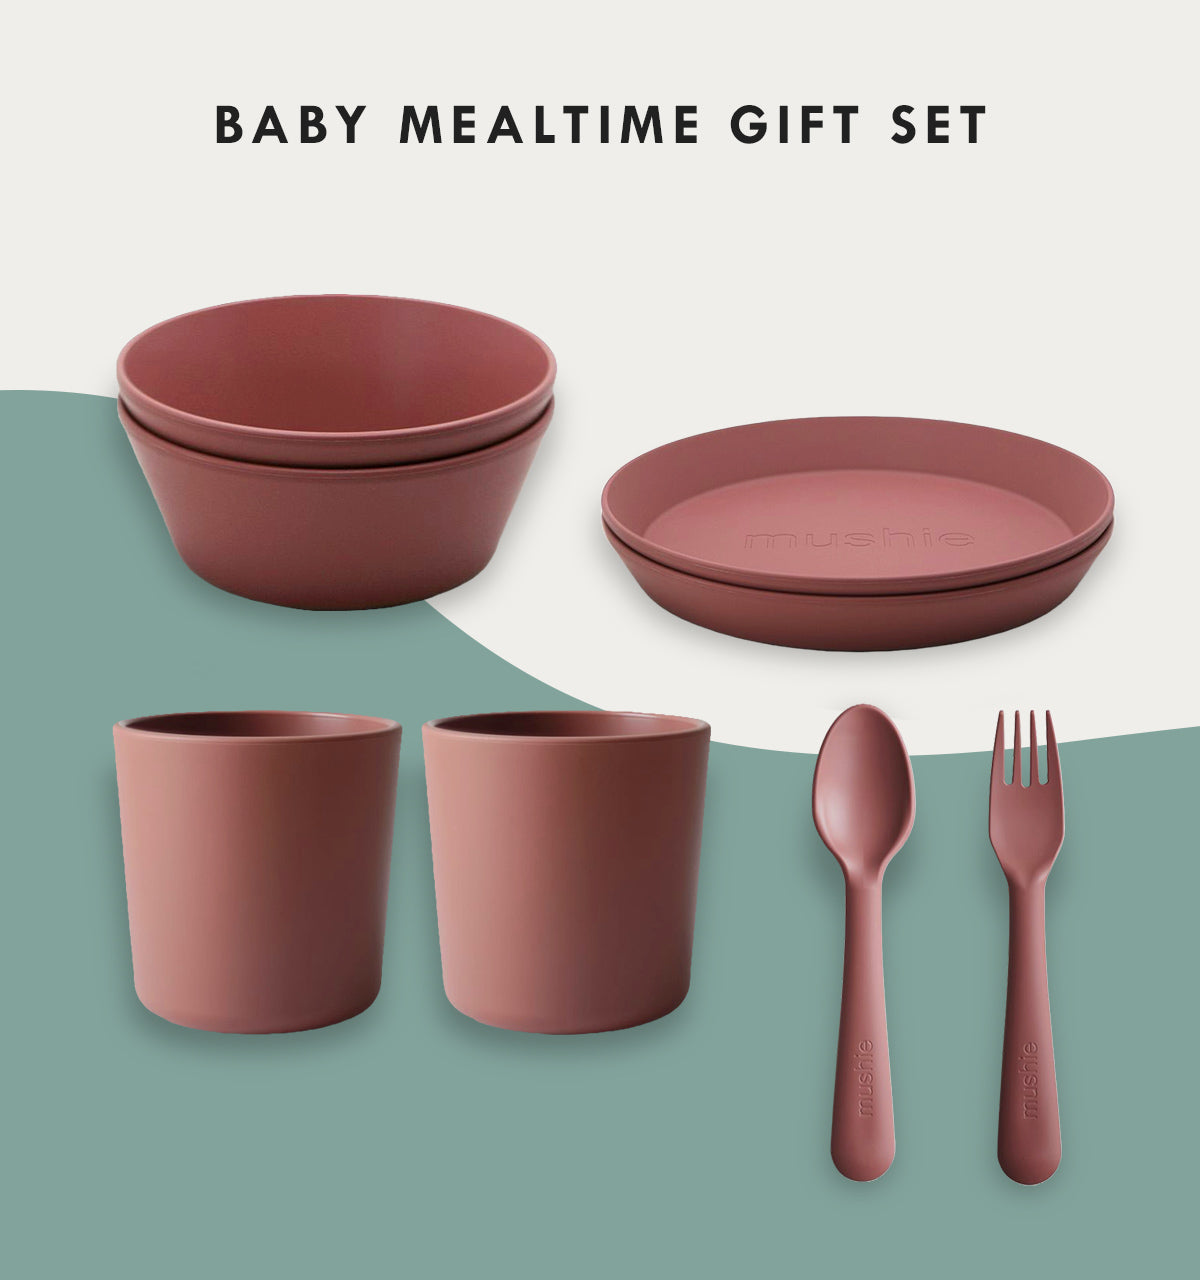 Baby Mealtime Gift Set